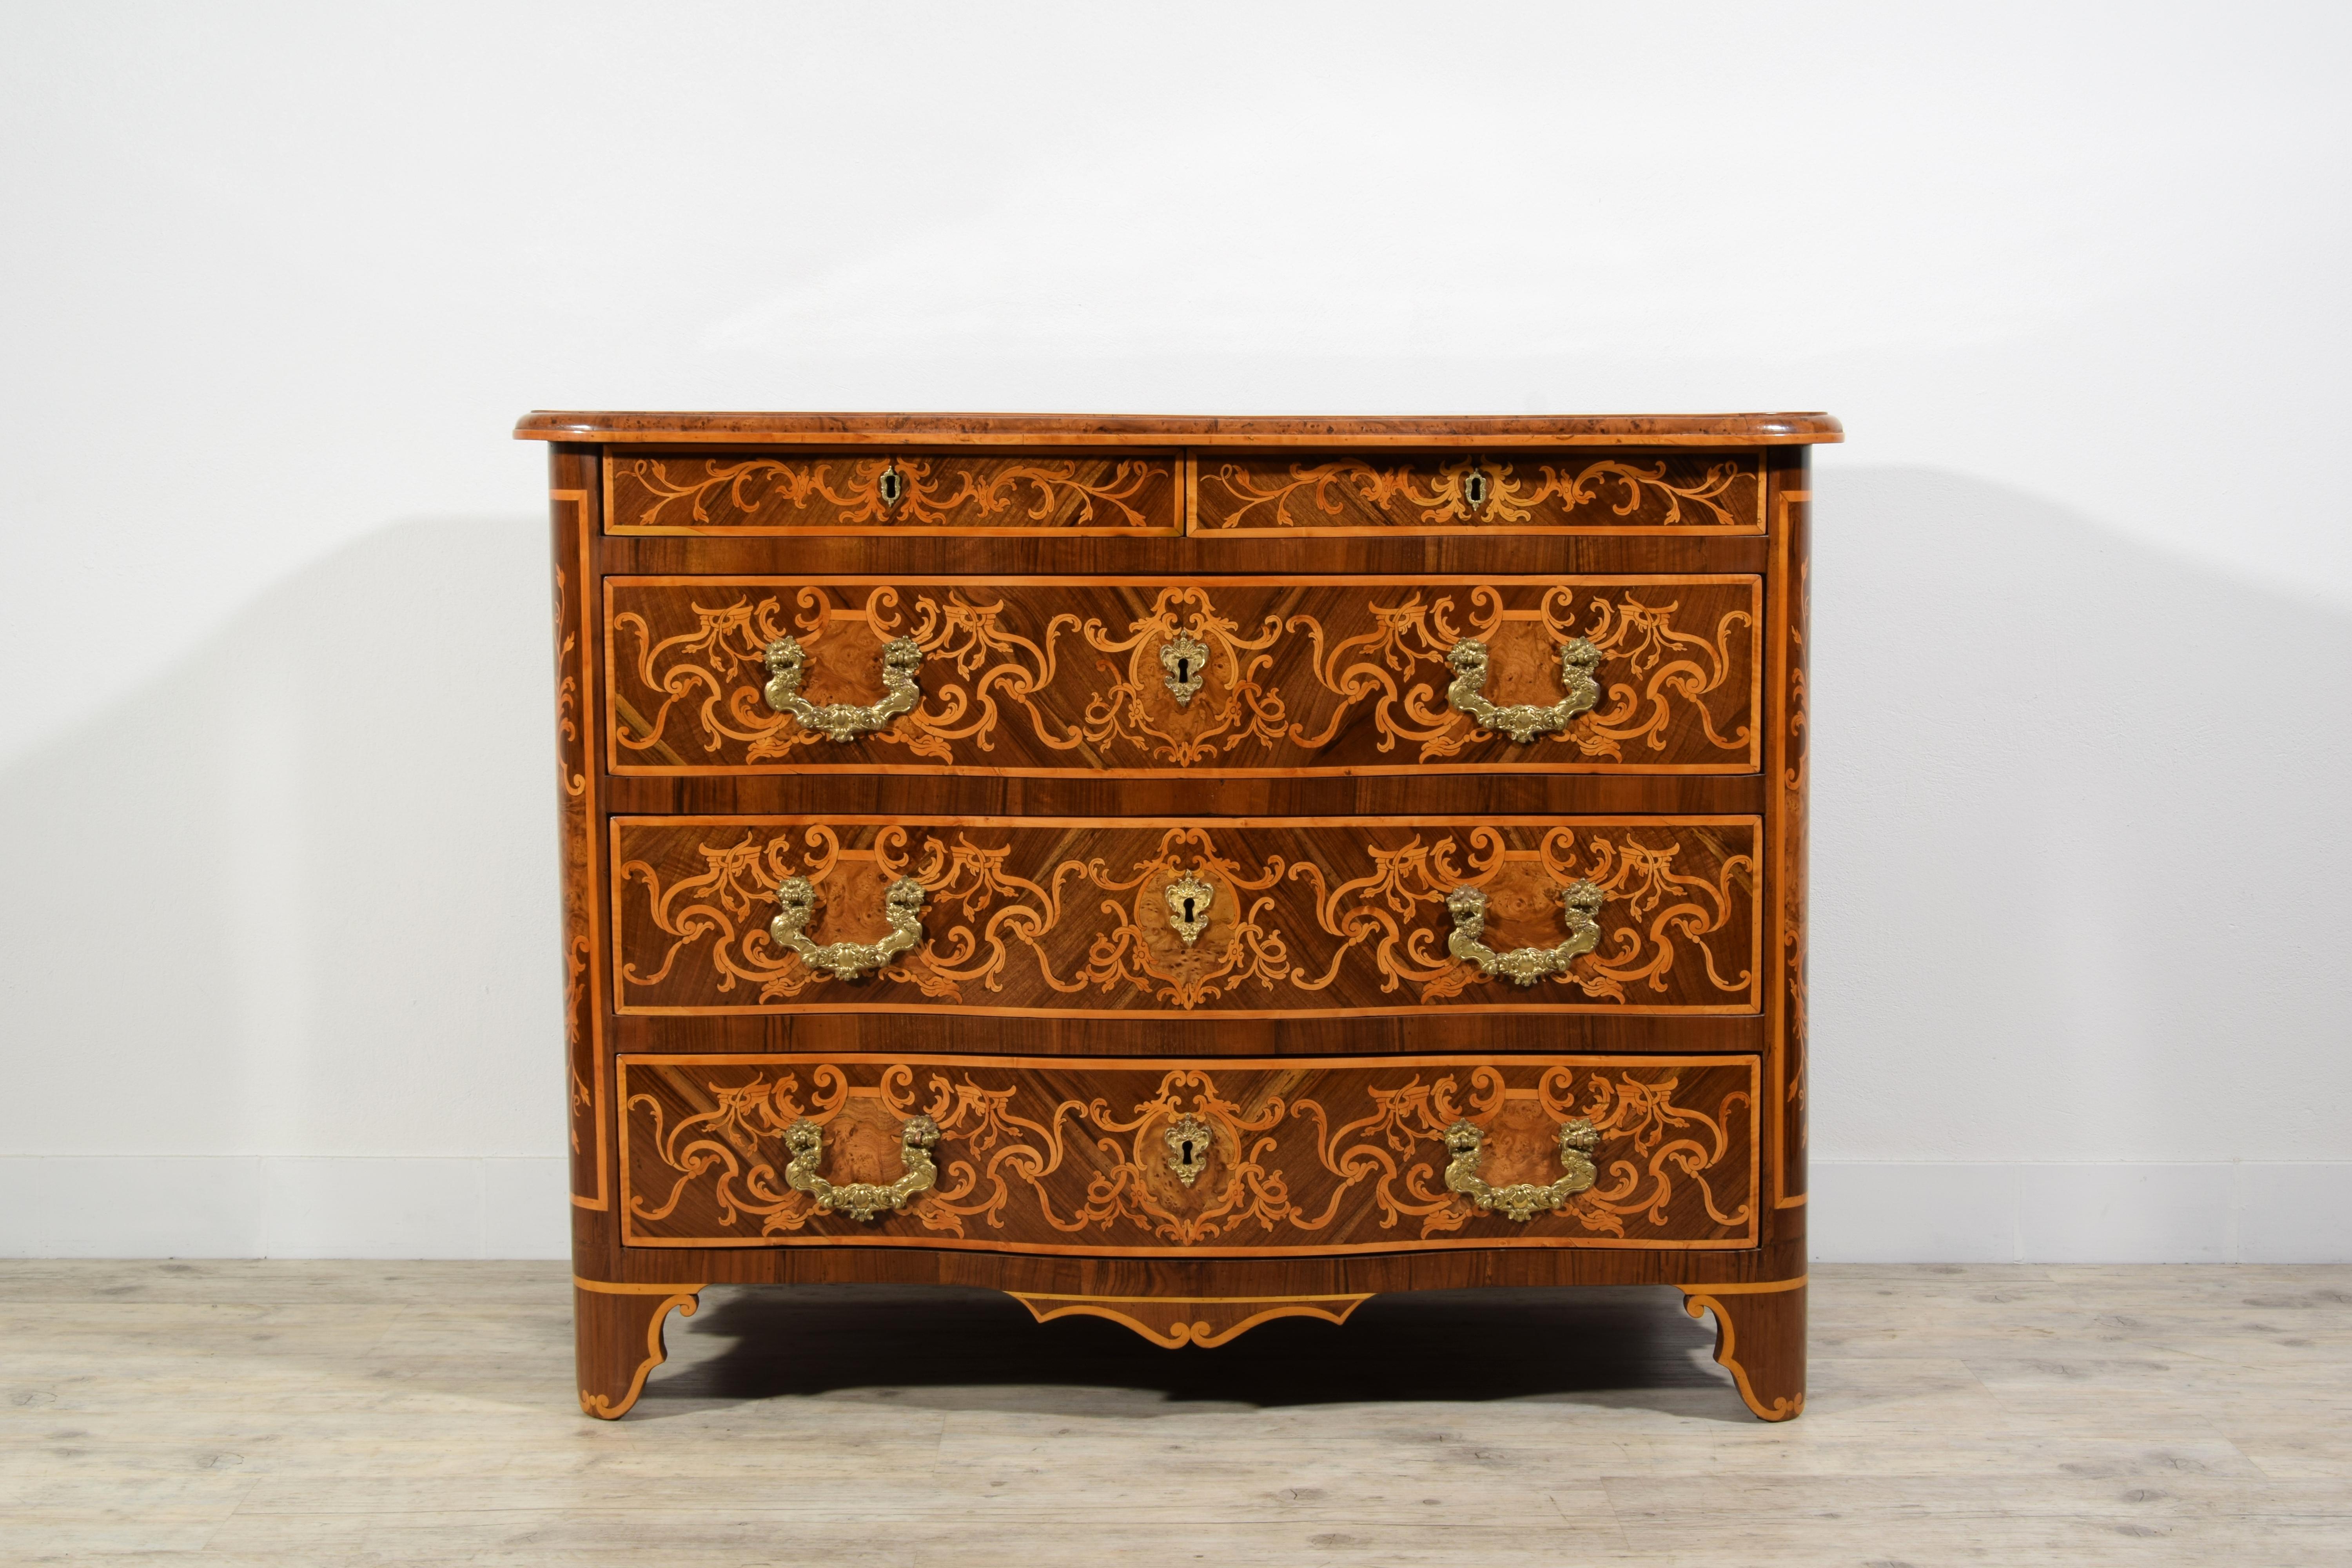 Hand-Carved 18th Century Italian Paved and Inlaid Wood Chest of Drawers